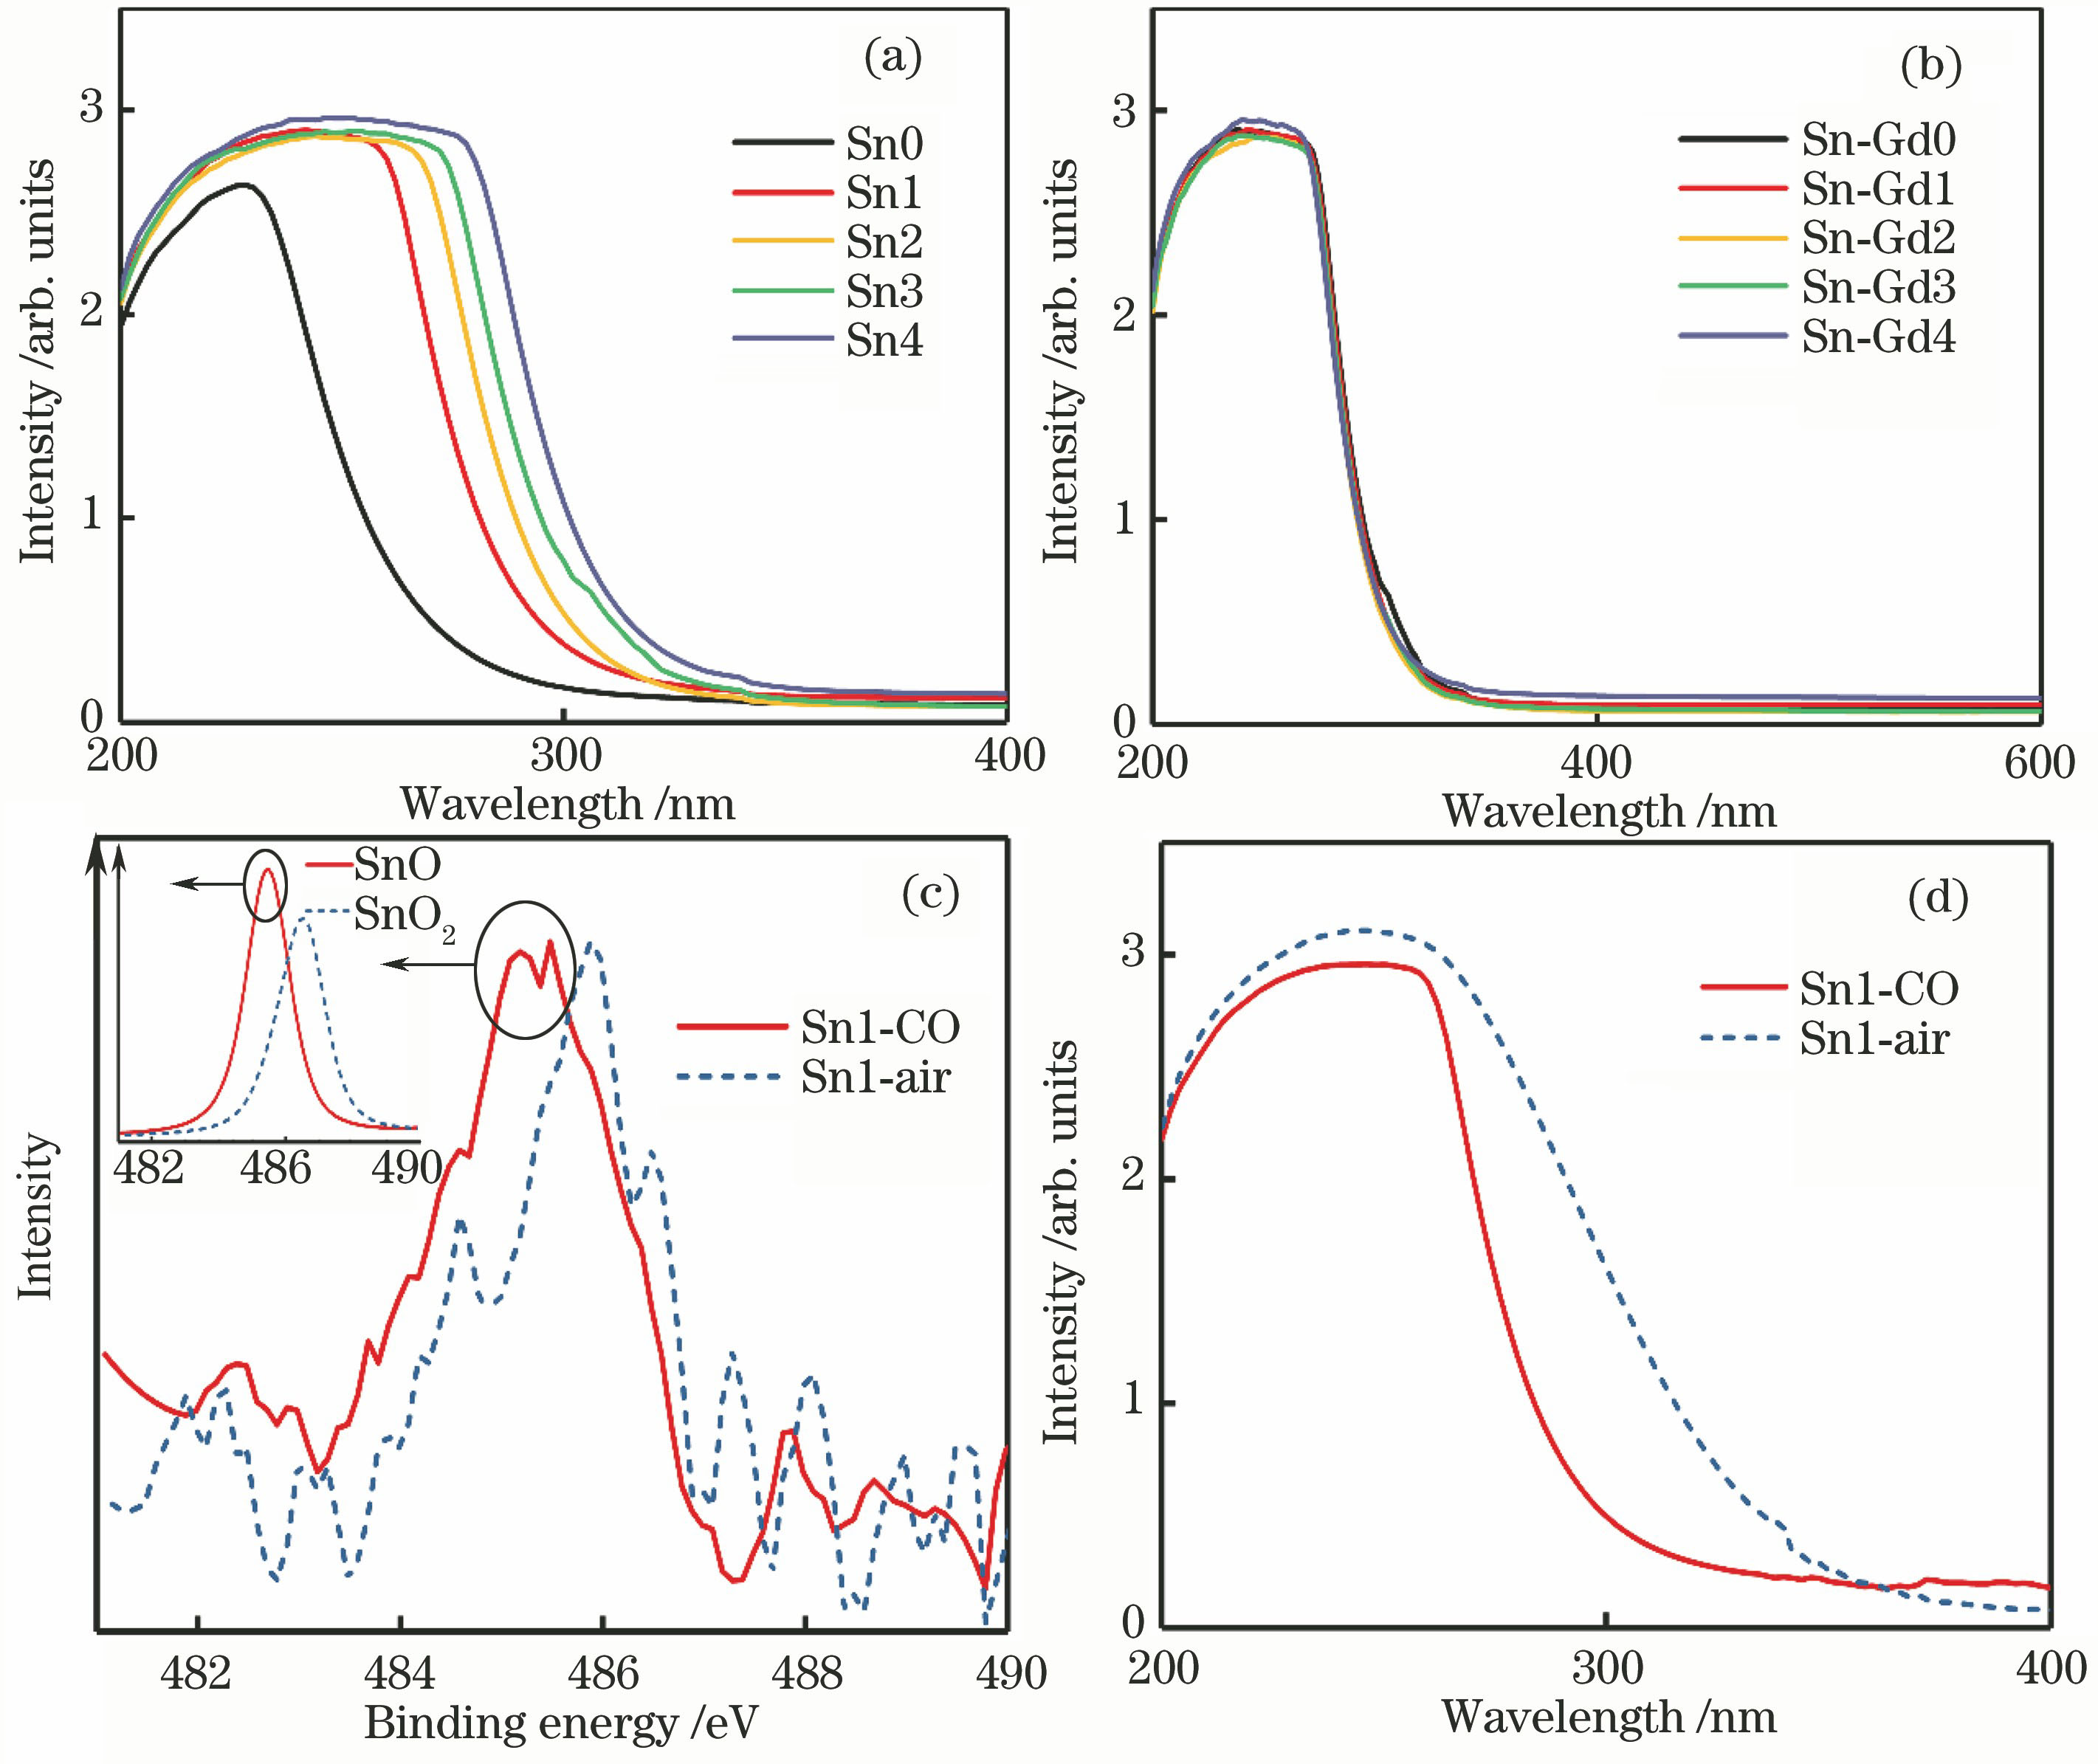 Absorption spectra and XPS spectra. (a) Absorption spectra of un-doped Si-B glass and Si-B glasses doped with different Sn2+ concentrations; (b) absorption spectra of Si-B glasses with different Gd2O3 concentrations; (c) XPS spectra of Sn1 prepared in CO and air atmospheres; (d) absorption spectra of Sn1 prepared in CO and air atmospheres